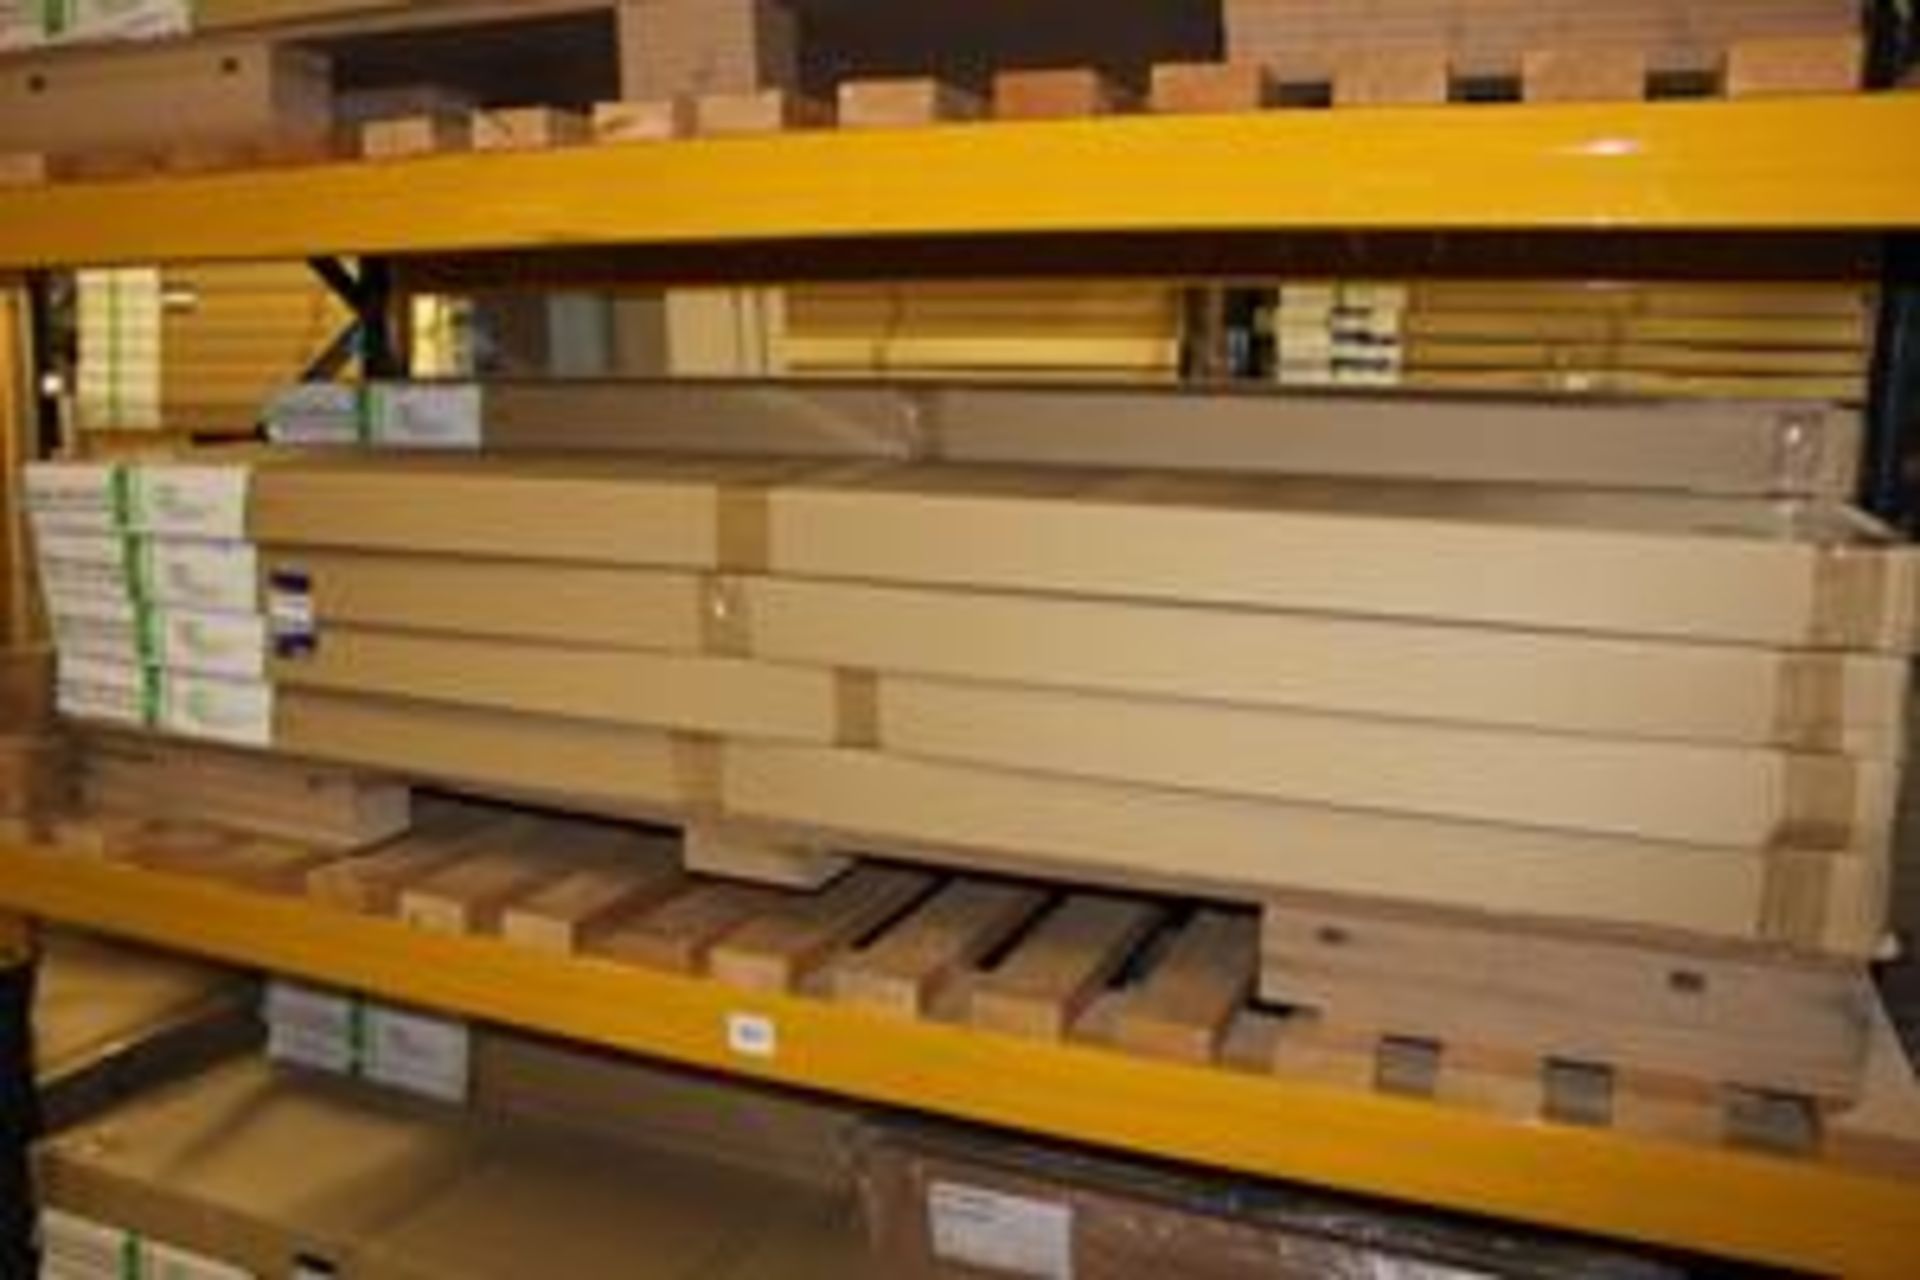 5 x Palma 7 Panel Bi Fold BFPAL7P27 1981x686x35mm Internal Door - Lots to be handed out in order